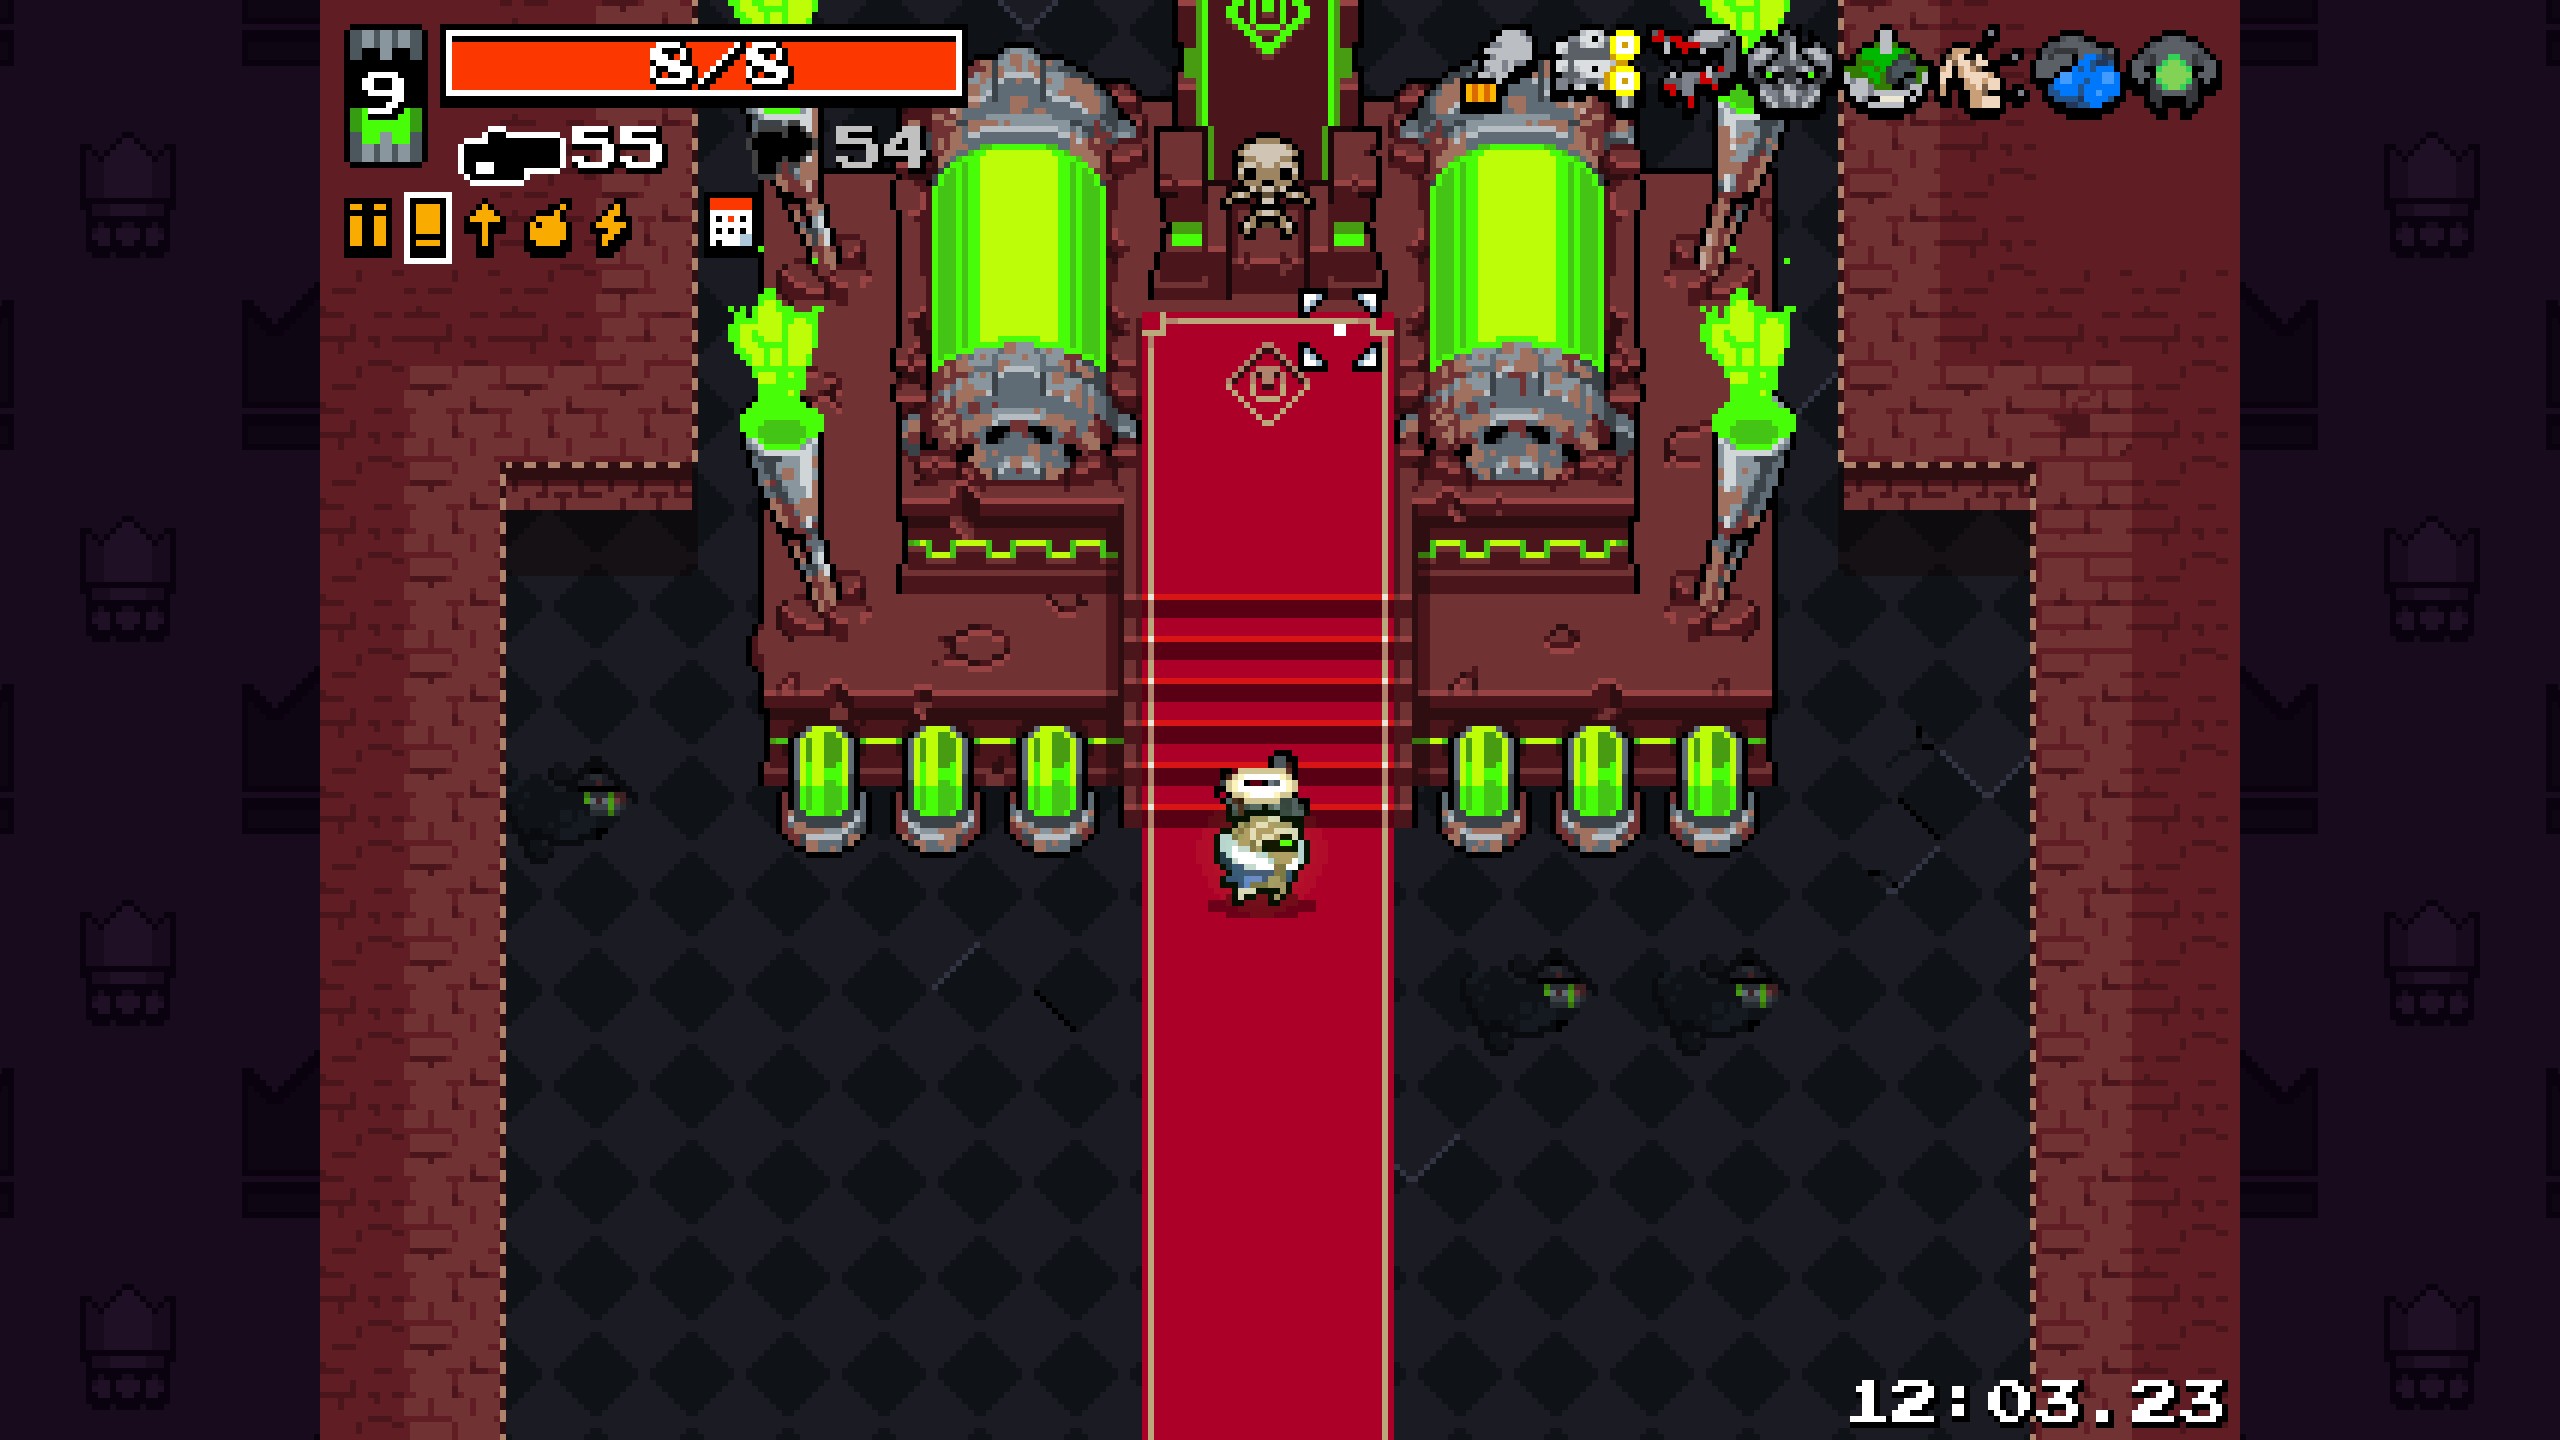 Why Nuclear Throne is still the best roguelike around